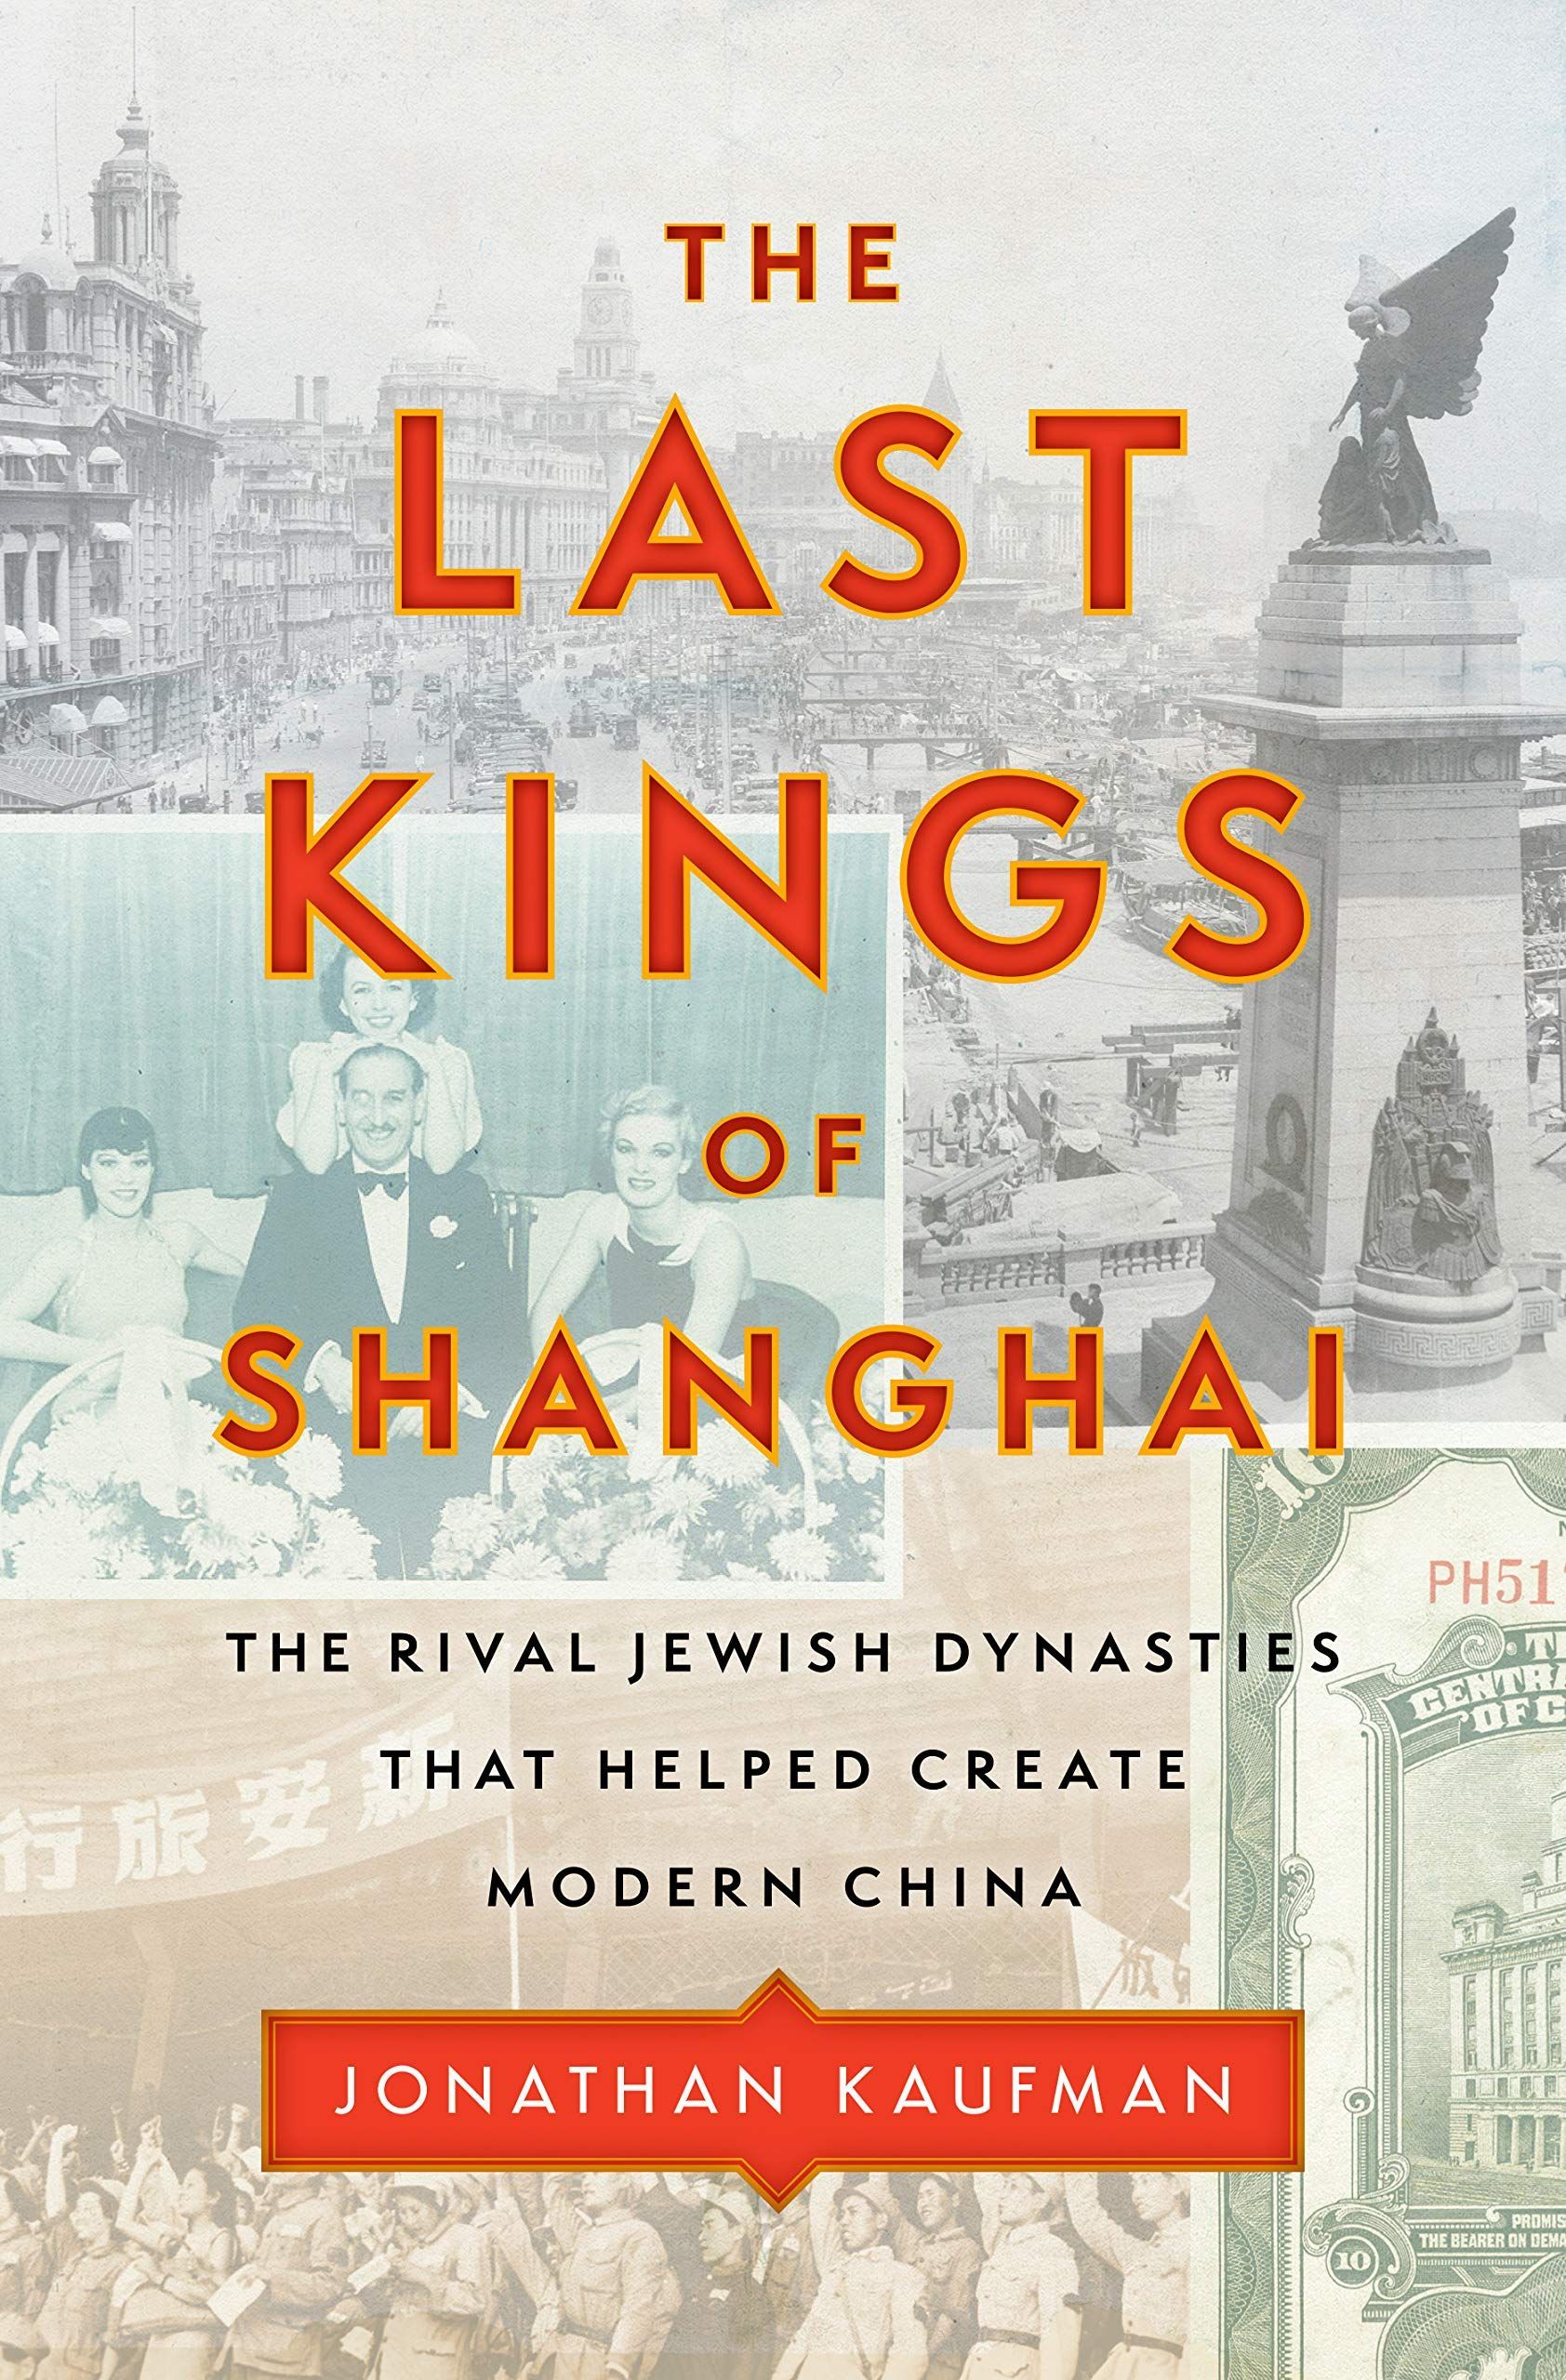 “History Has Many Cunning Passages”: On Jonathan Kaufman’s “The Last Kings of Shanghai”